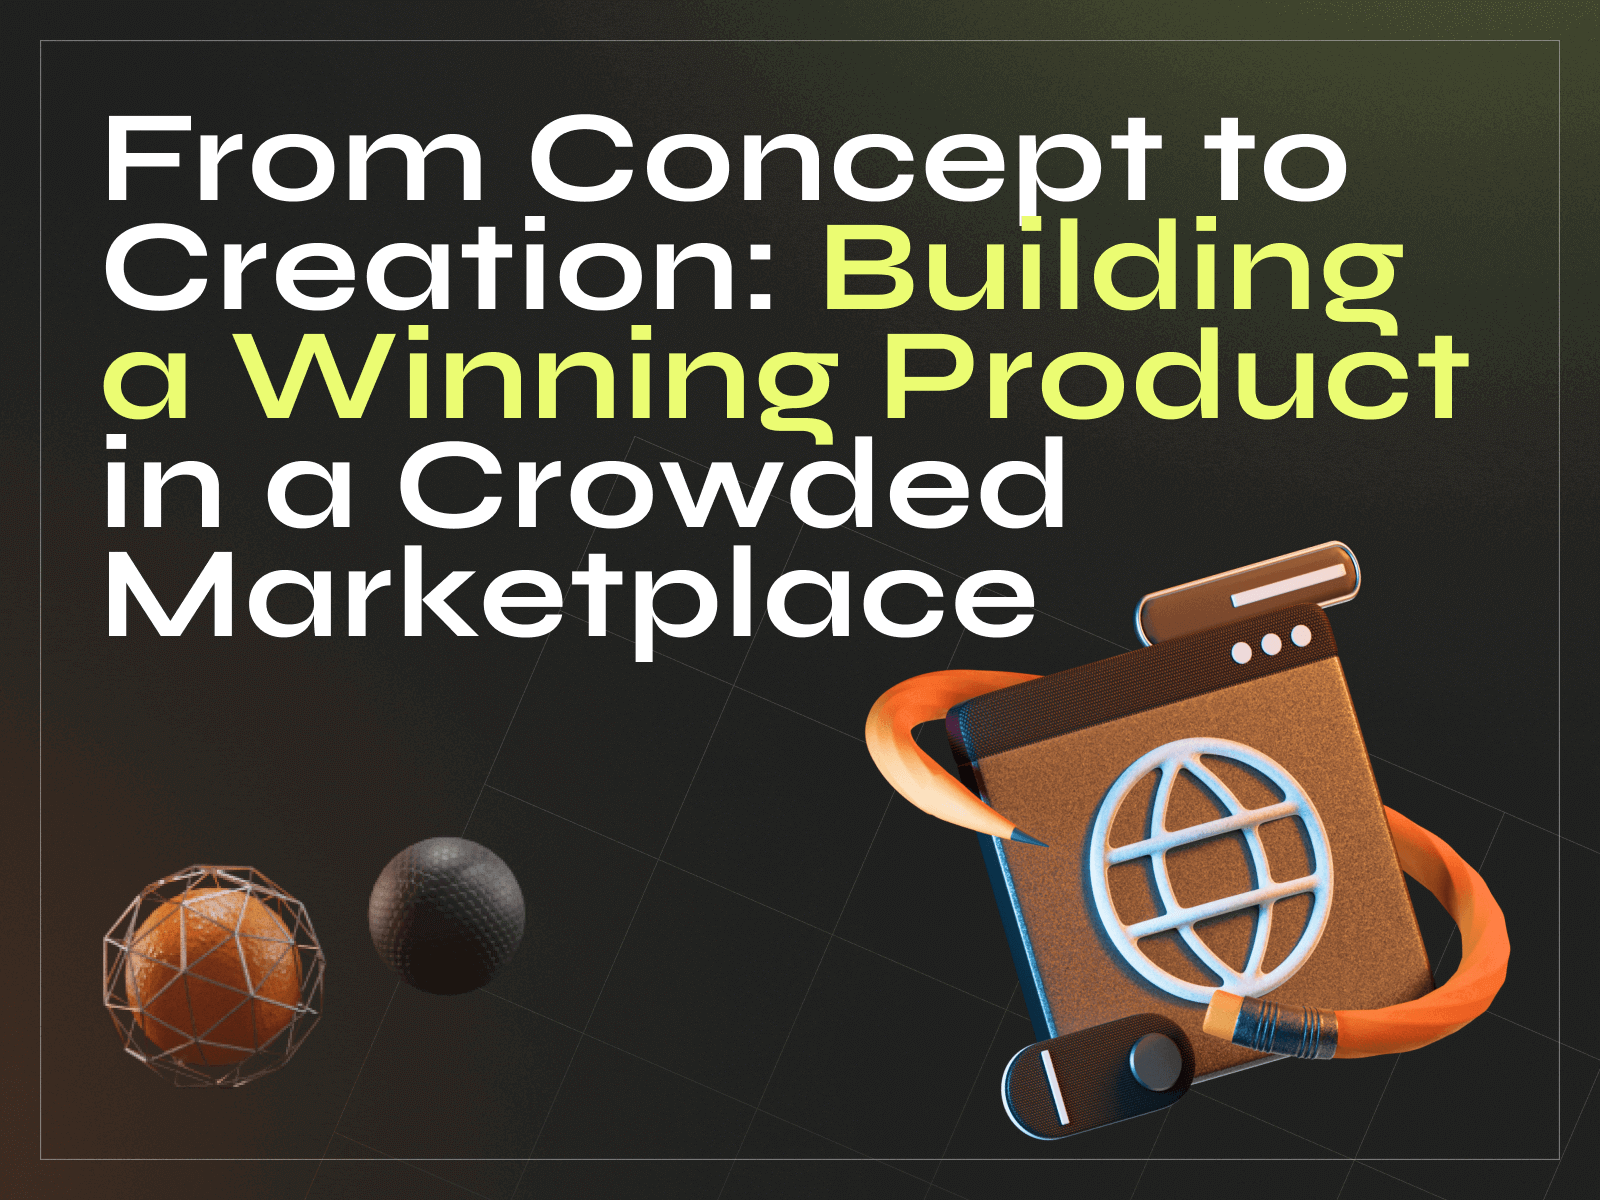 From Concept to Creation: Building a Winning Product in a Crowded Marketplace - Photo 